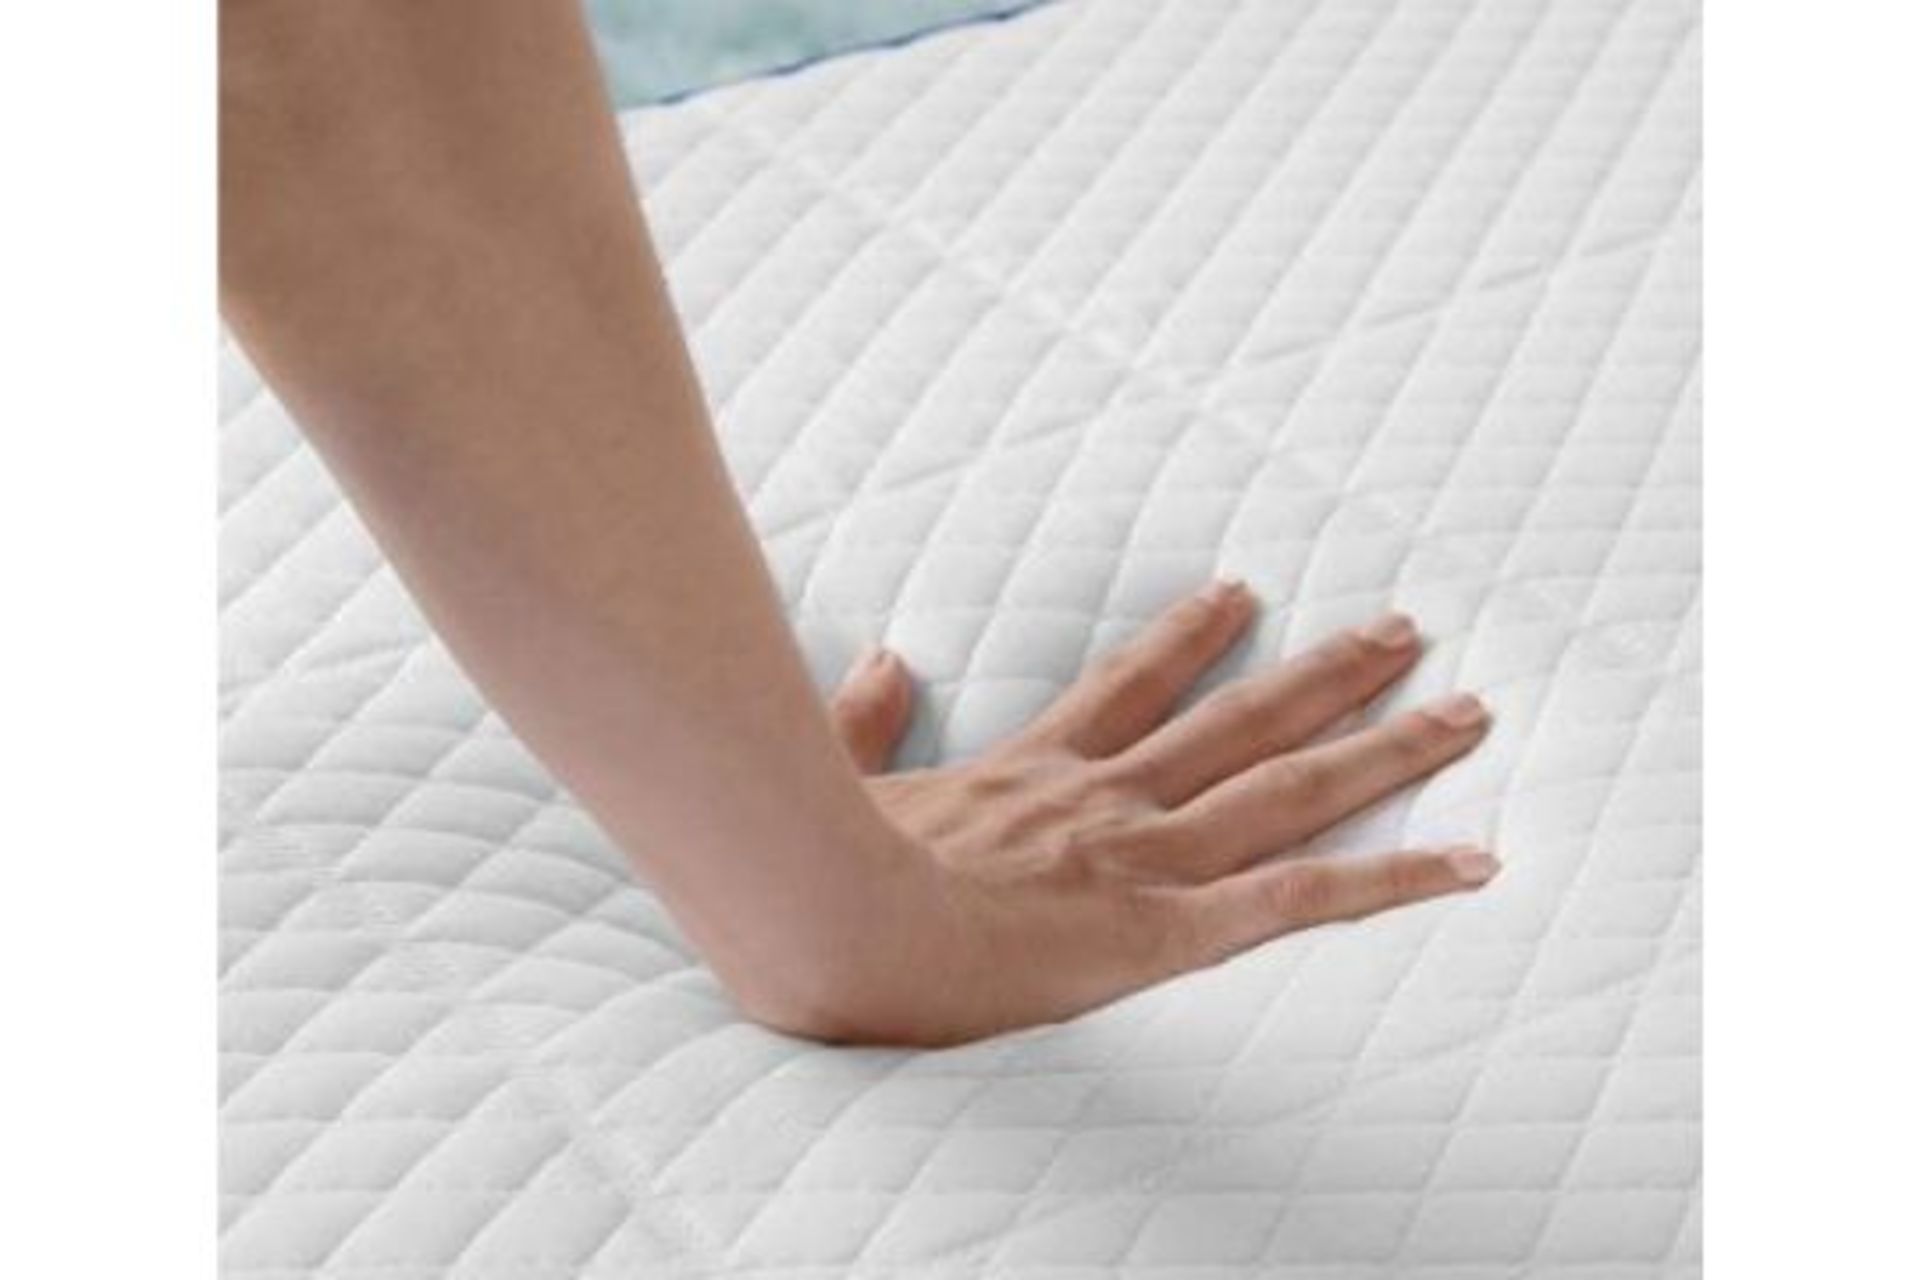 5ft Nectar Professionally Refurbished Smart Pressure Relieving Memory Foam Mattress|RRP £669| - Image 2 of 4